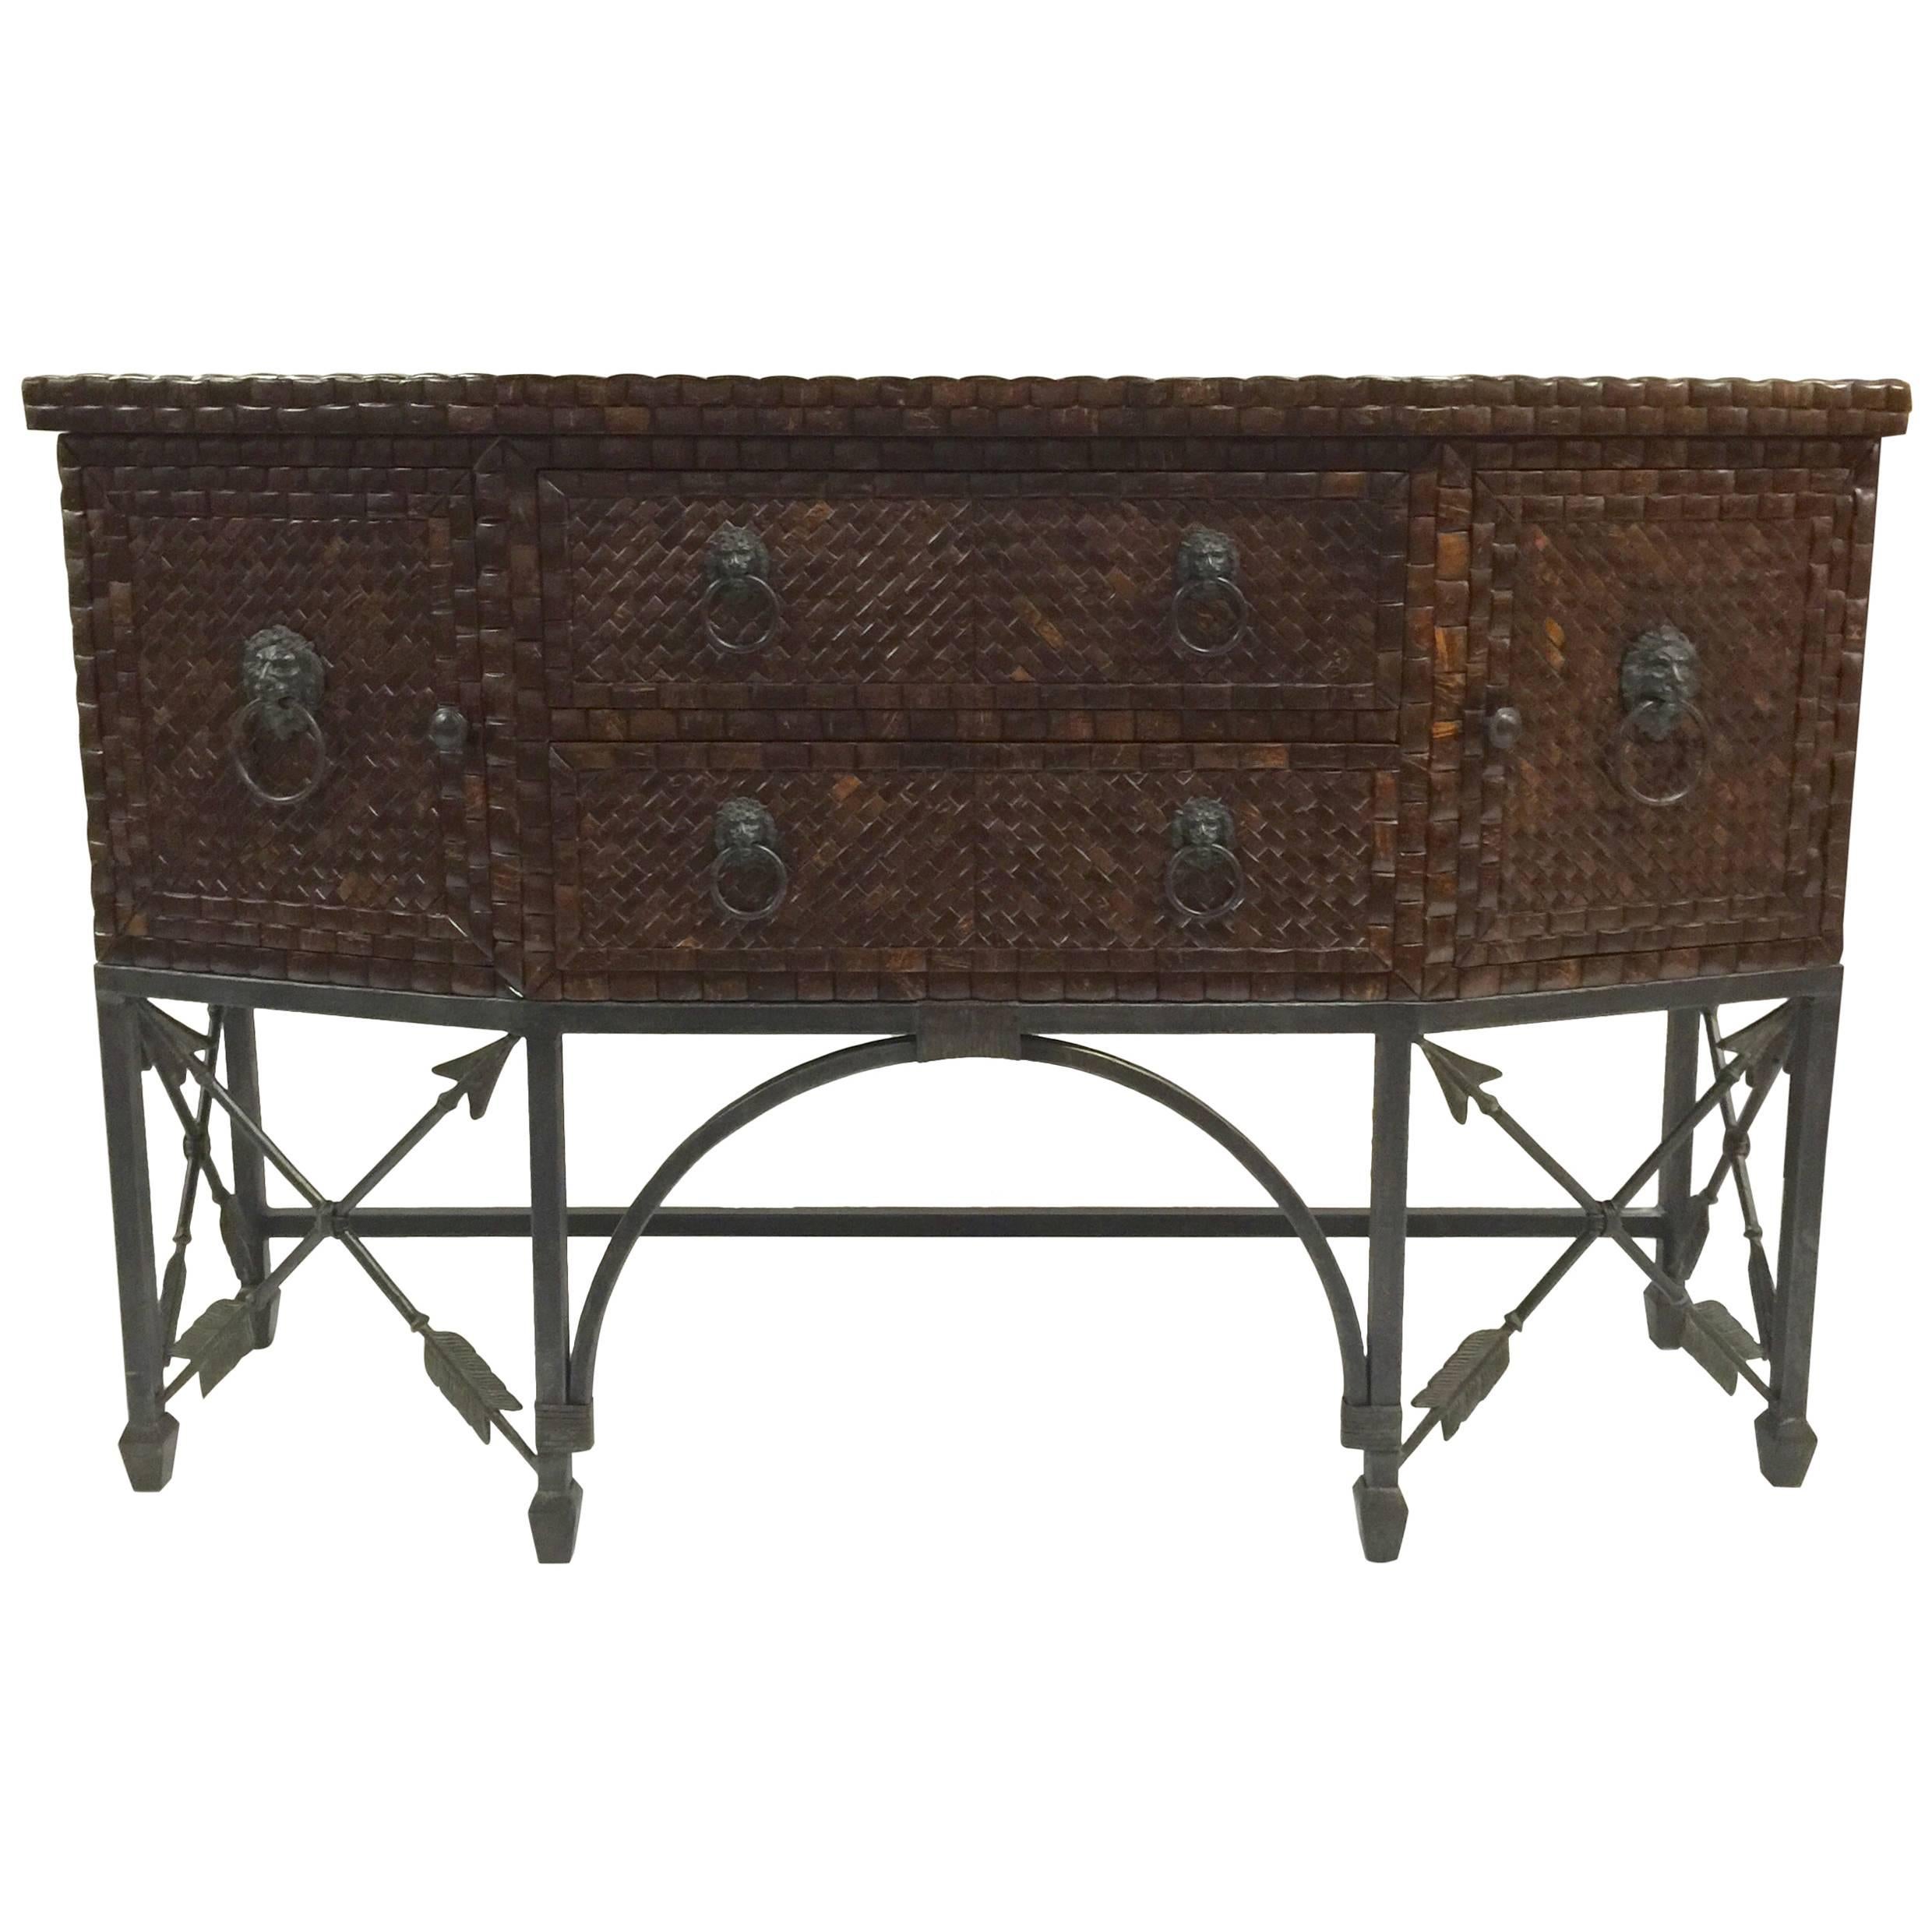 1970s Inlaid Coconut Shell & Hammered Copper Sideboard by Maitland-Smith